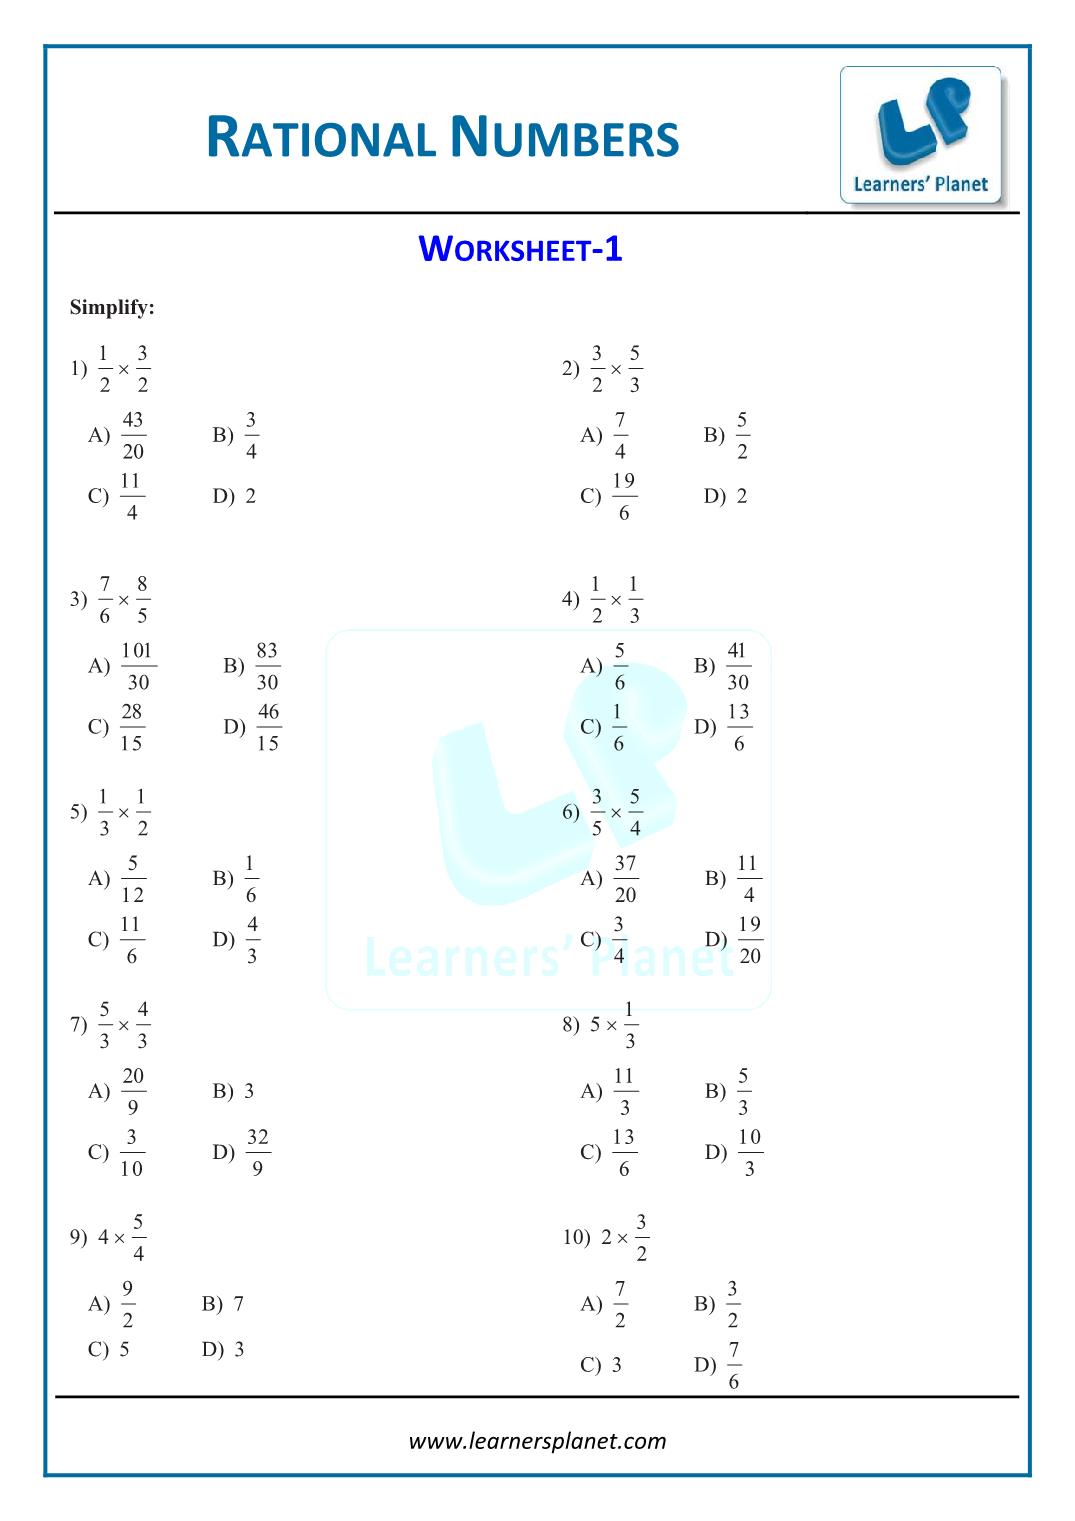 pin-by-keala-pane-e-on-math-in-2020-irrational-numbers-number-worksheets-rational-numbers